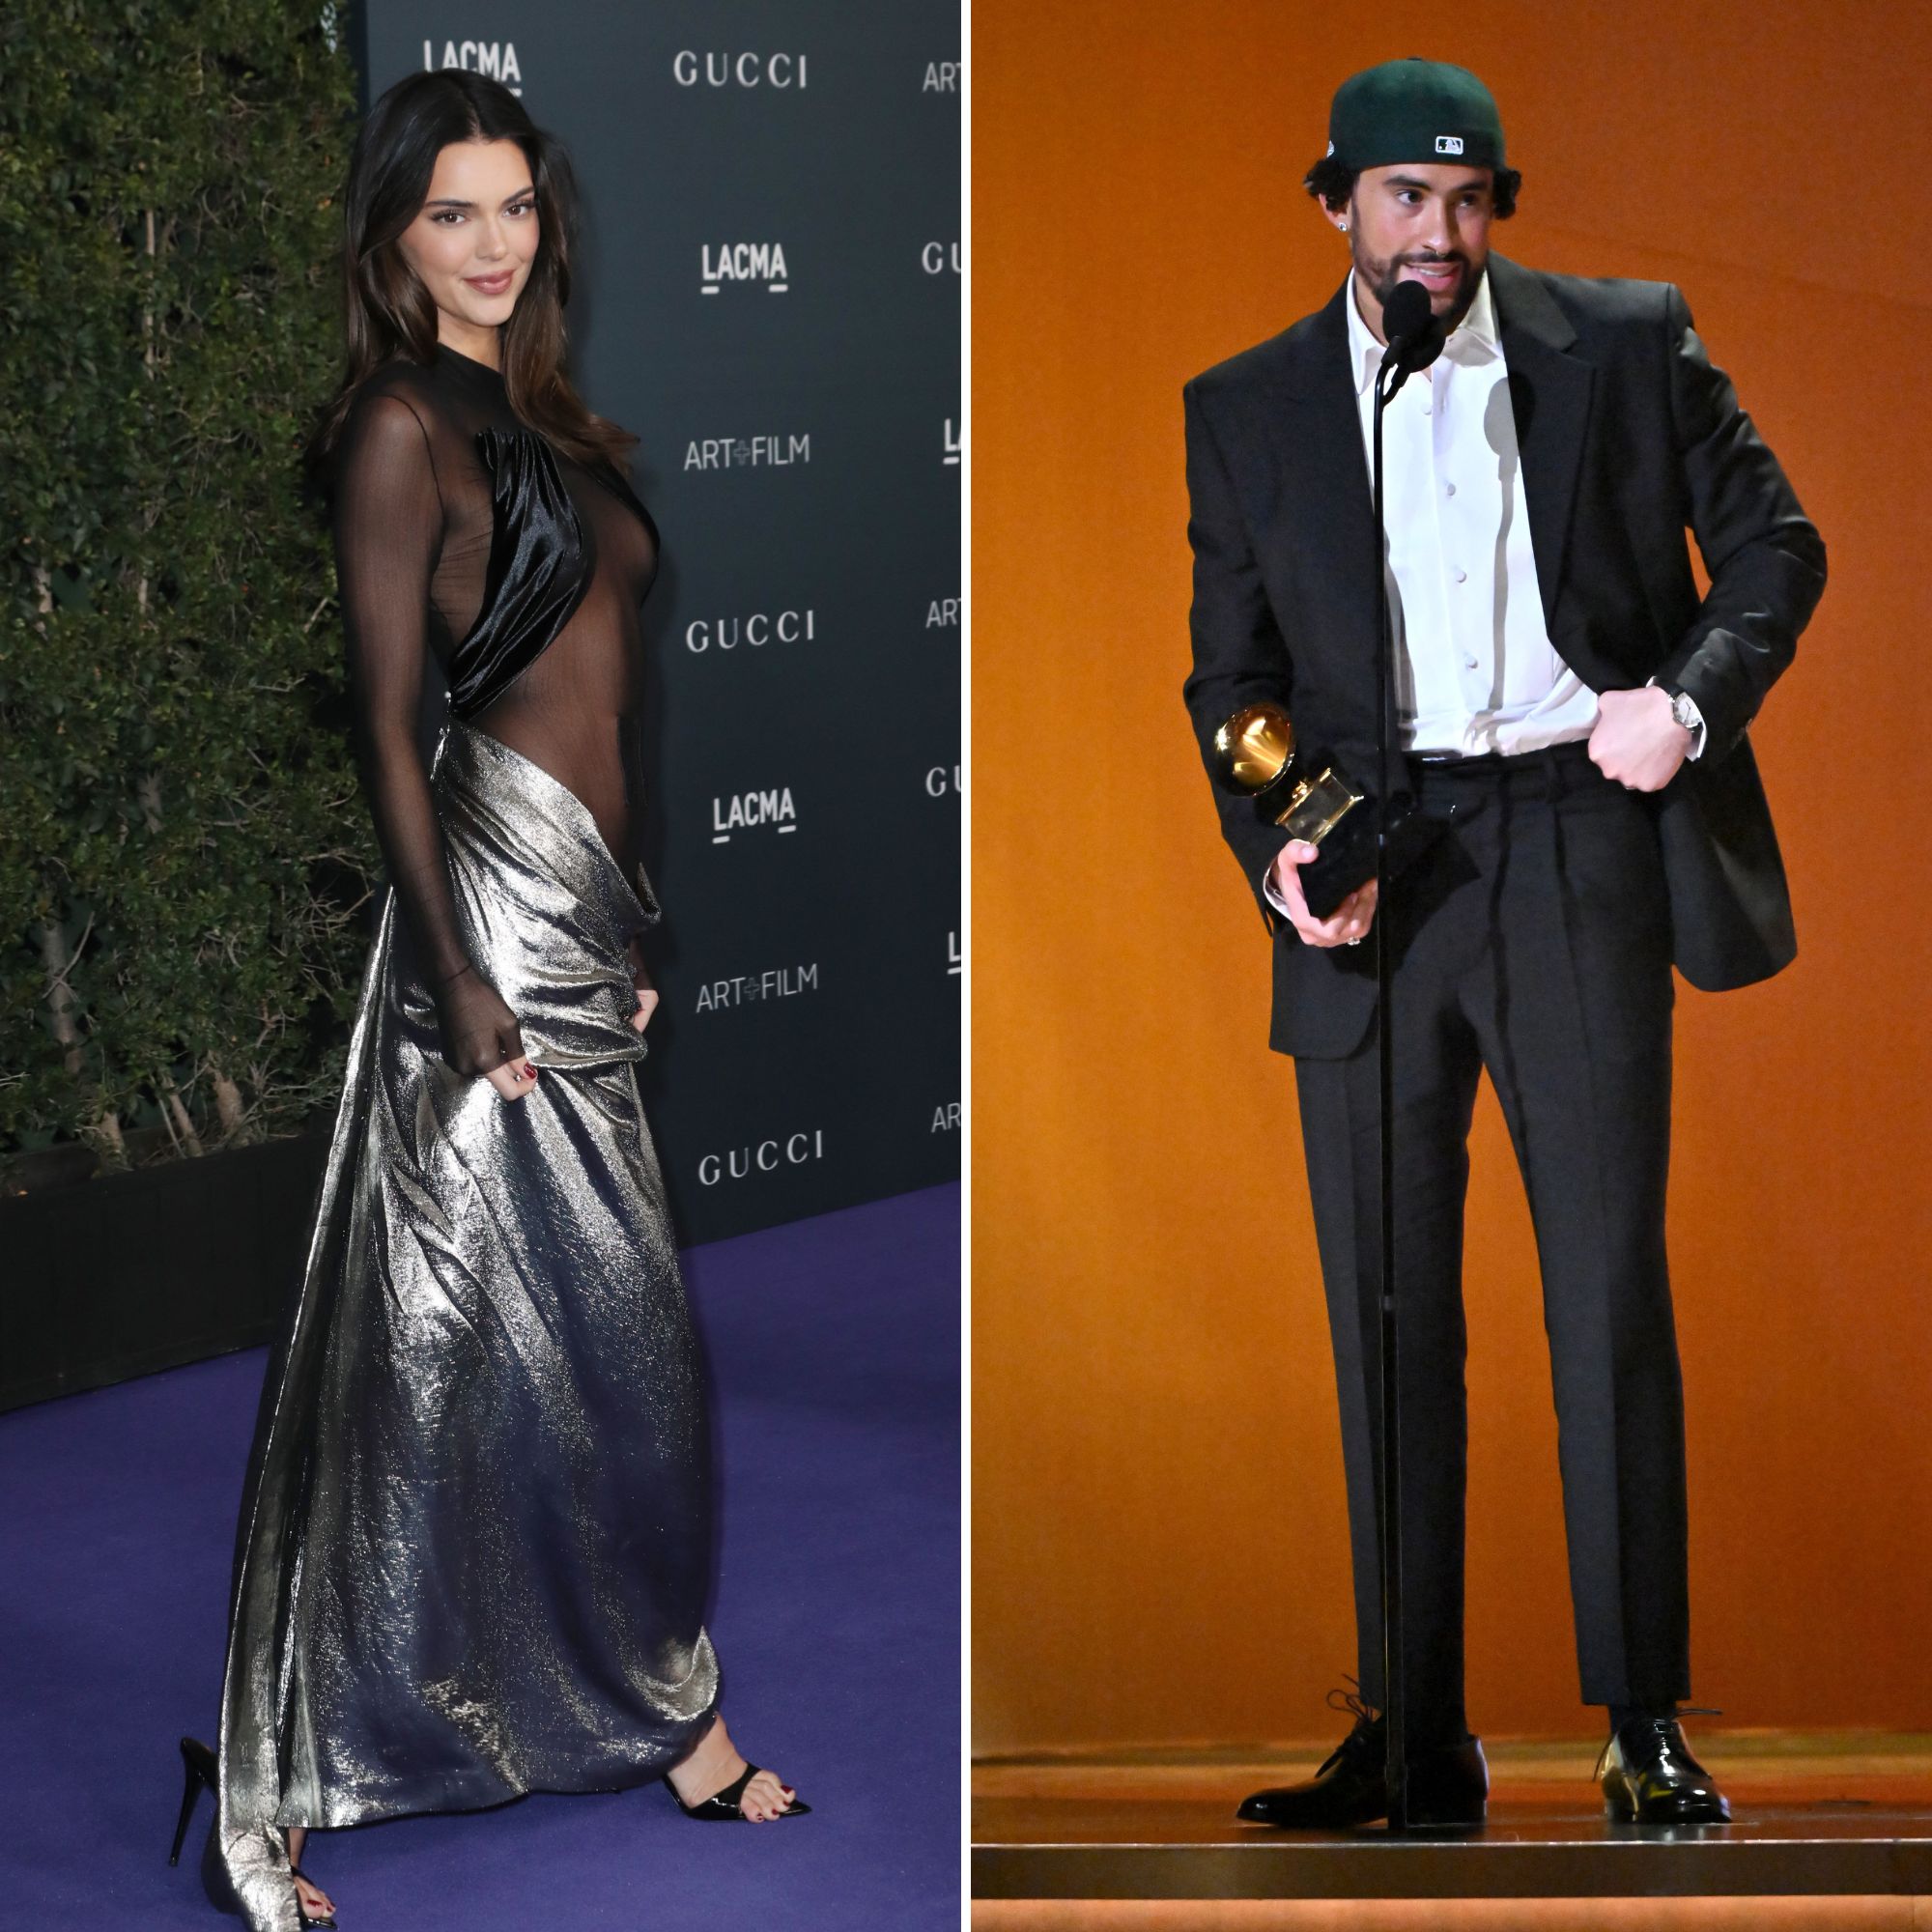 Kendall Jenner and Bad Bunny Wear Matching Looks On Date Night in LA